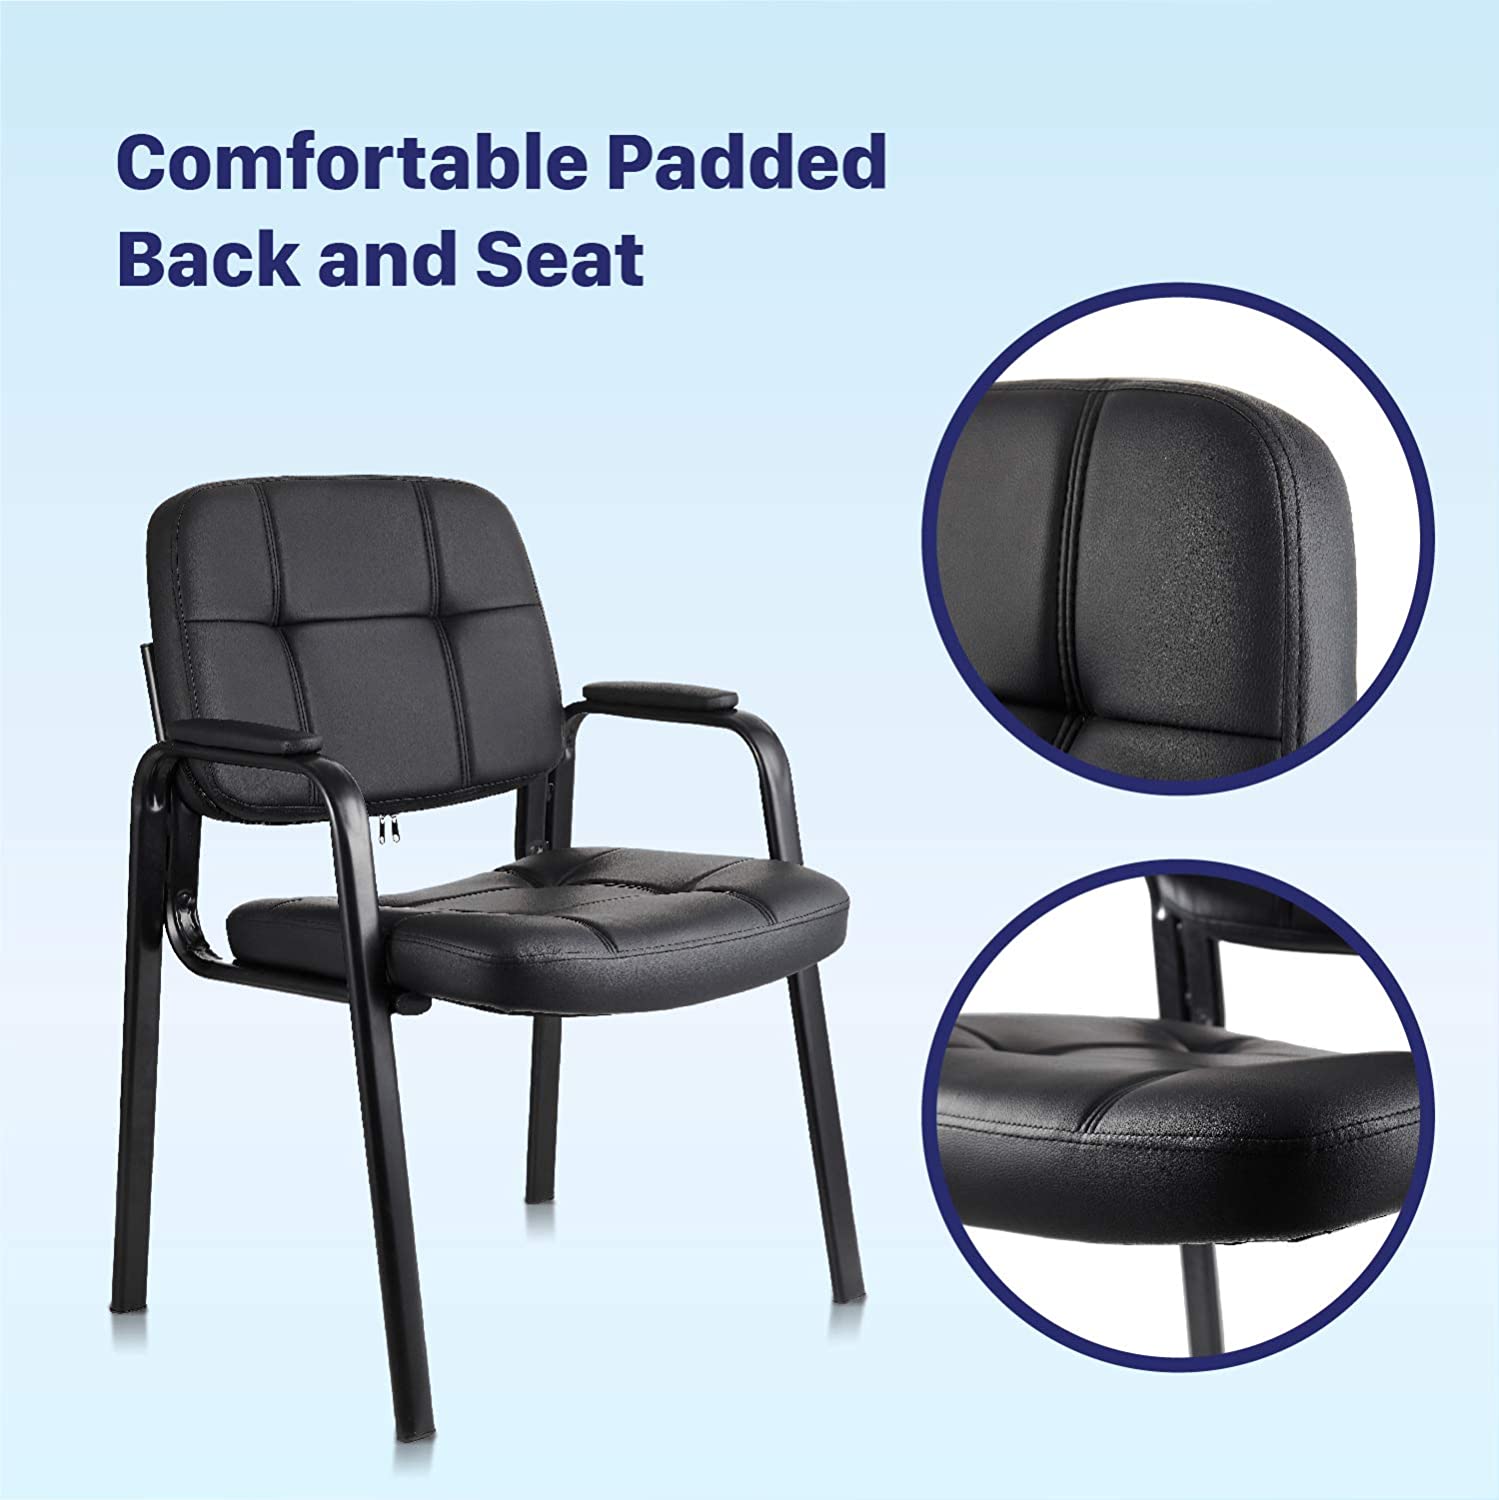 CLATINA Waiting Room Guest Chair with Bonded Leather Padded Arm Rest for Office Reception Black 2Pack - image 3 of 6